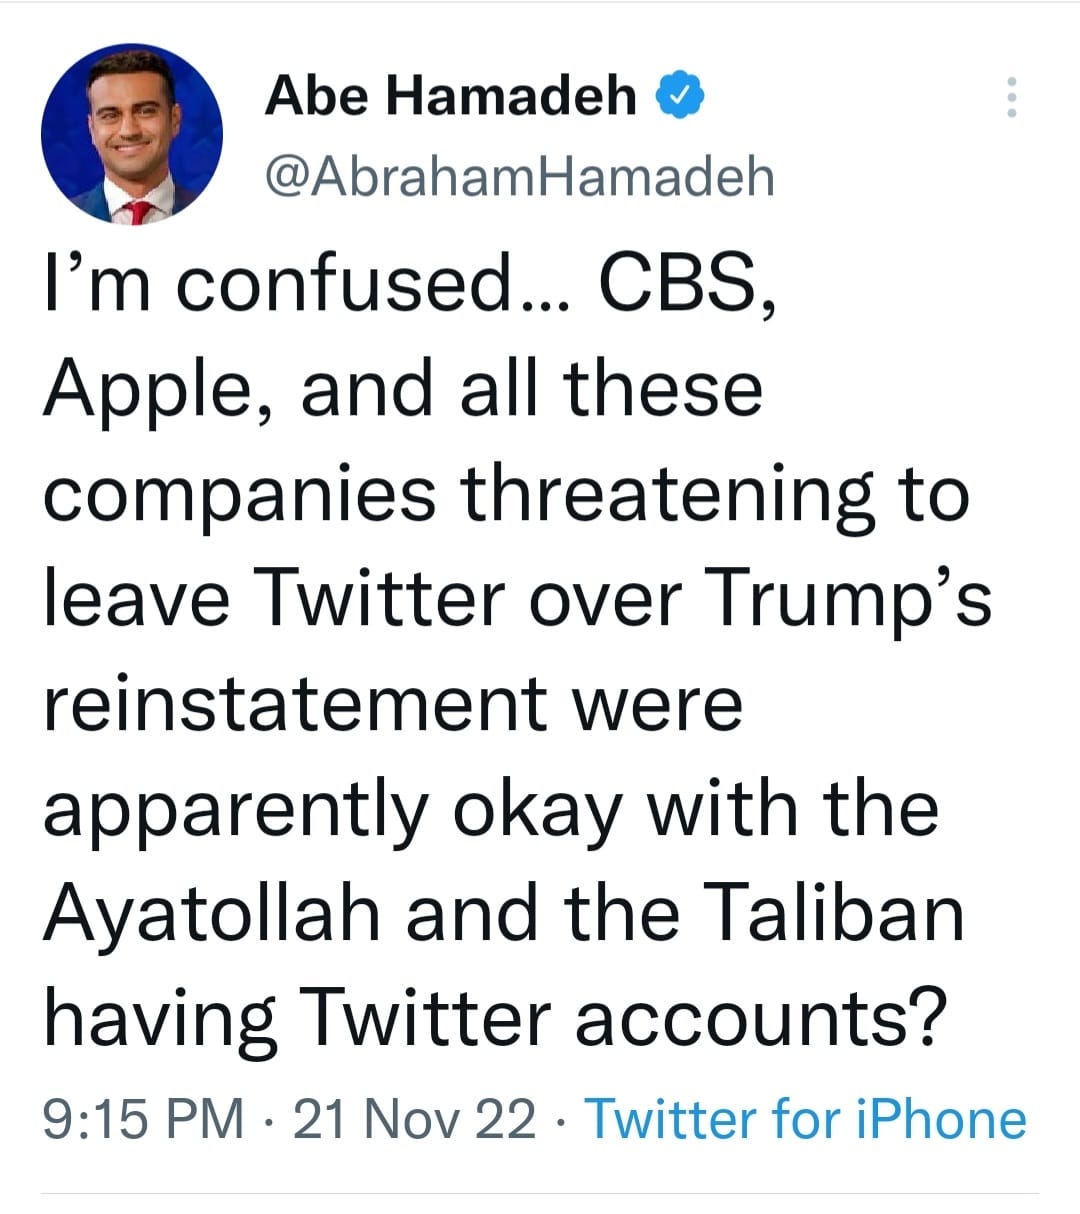 May be a Twitter screenshot of 1 person, standing and text that says 'Abe Hamadeh @AbrahamHamadeh I'm confused... CBS, Apple, and all these companies threatening to leave Twitter over Trump's reinstatement were apparently okay with the Ayatollah and the Taliban having Twitter accounts? 9:15 PM 21 Nov 22. Twitter for iPhone'